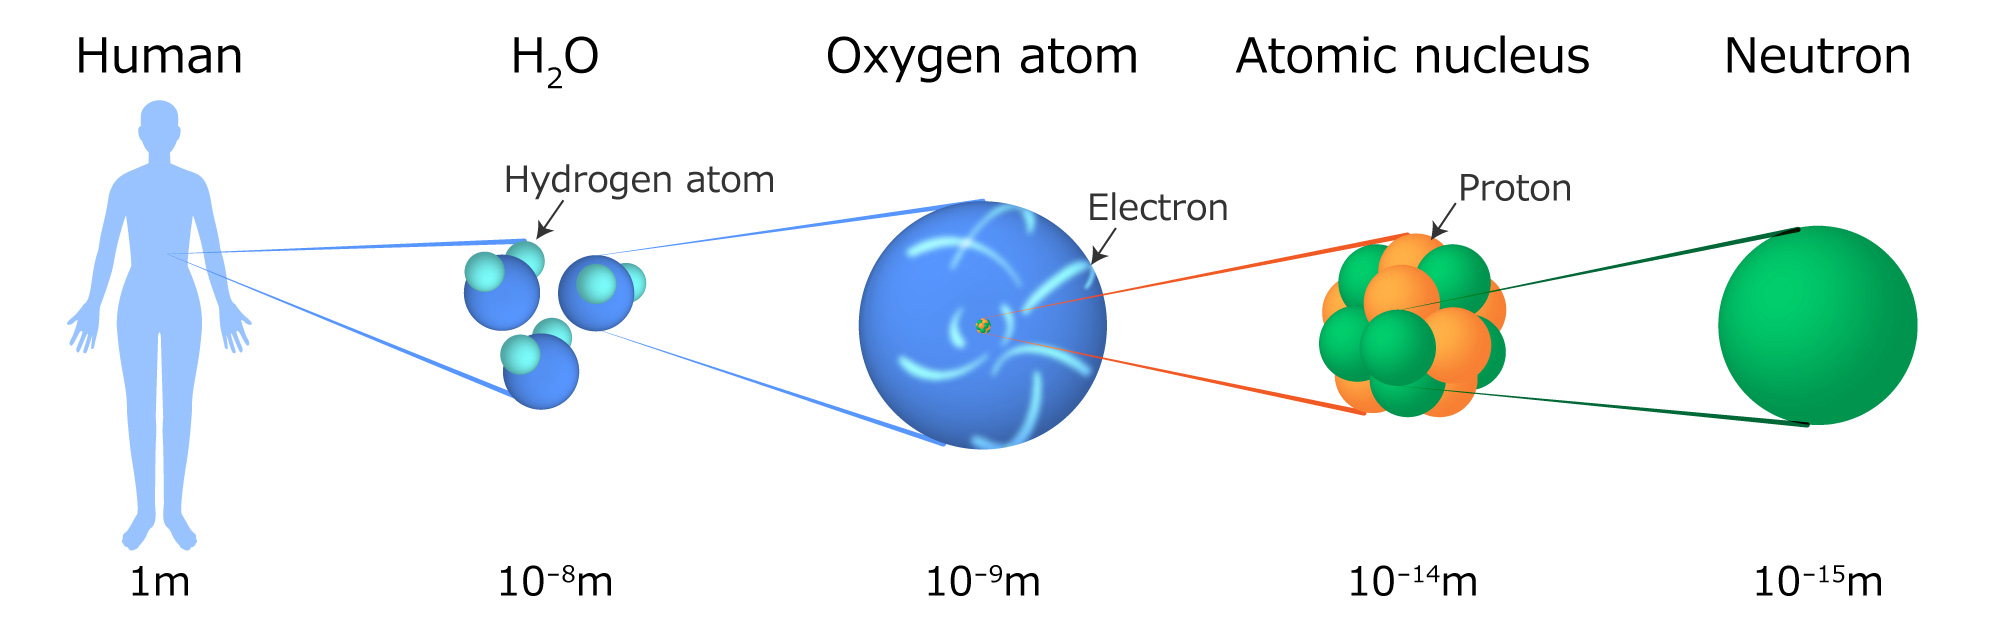 What kind of object is a neutron?